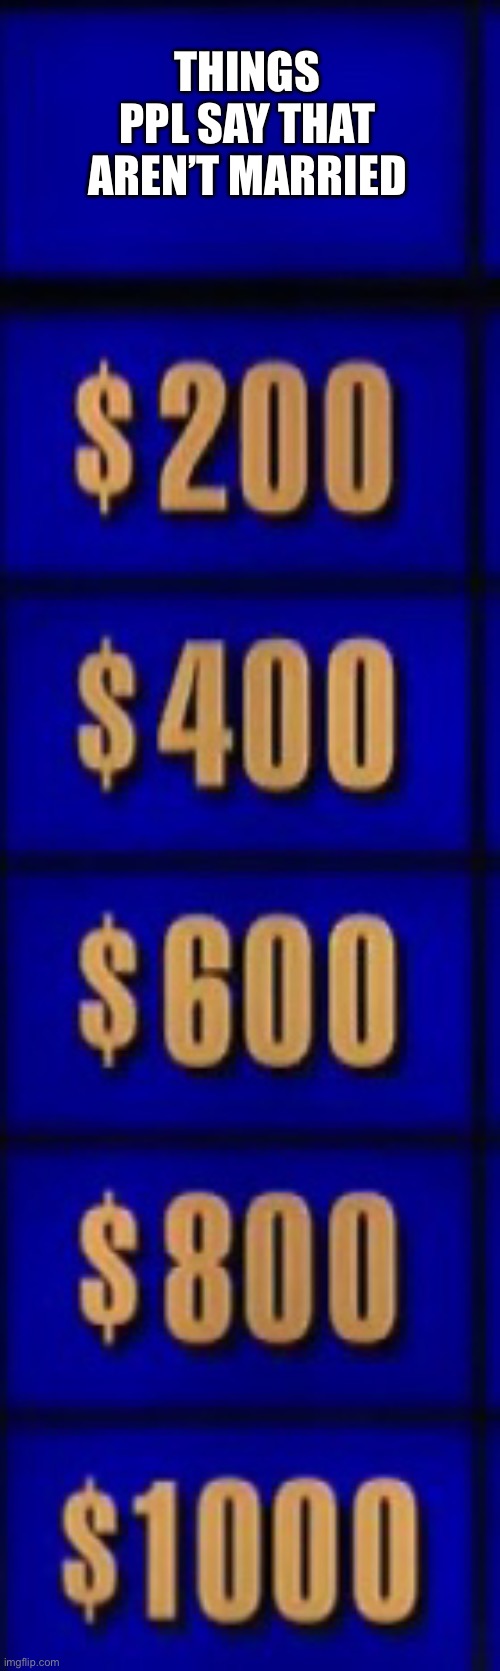 Jeopardy category | THINGS PPL SAY THAT AREN’T MARRIED | image tagged in jeopardy category | made w/ Imgflip meme maker